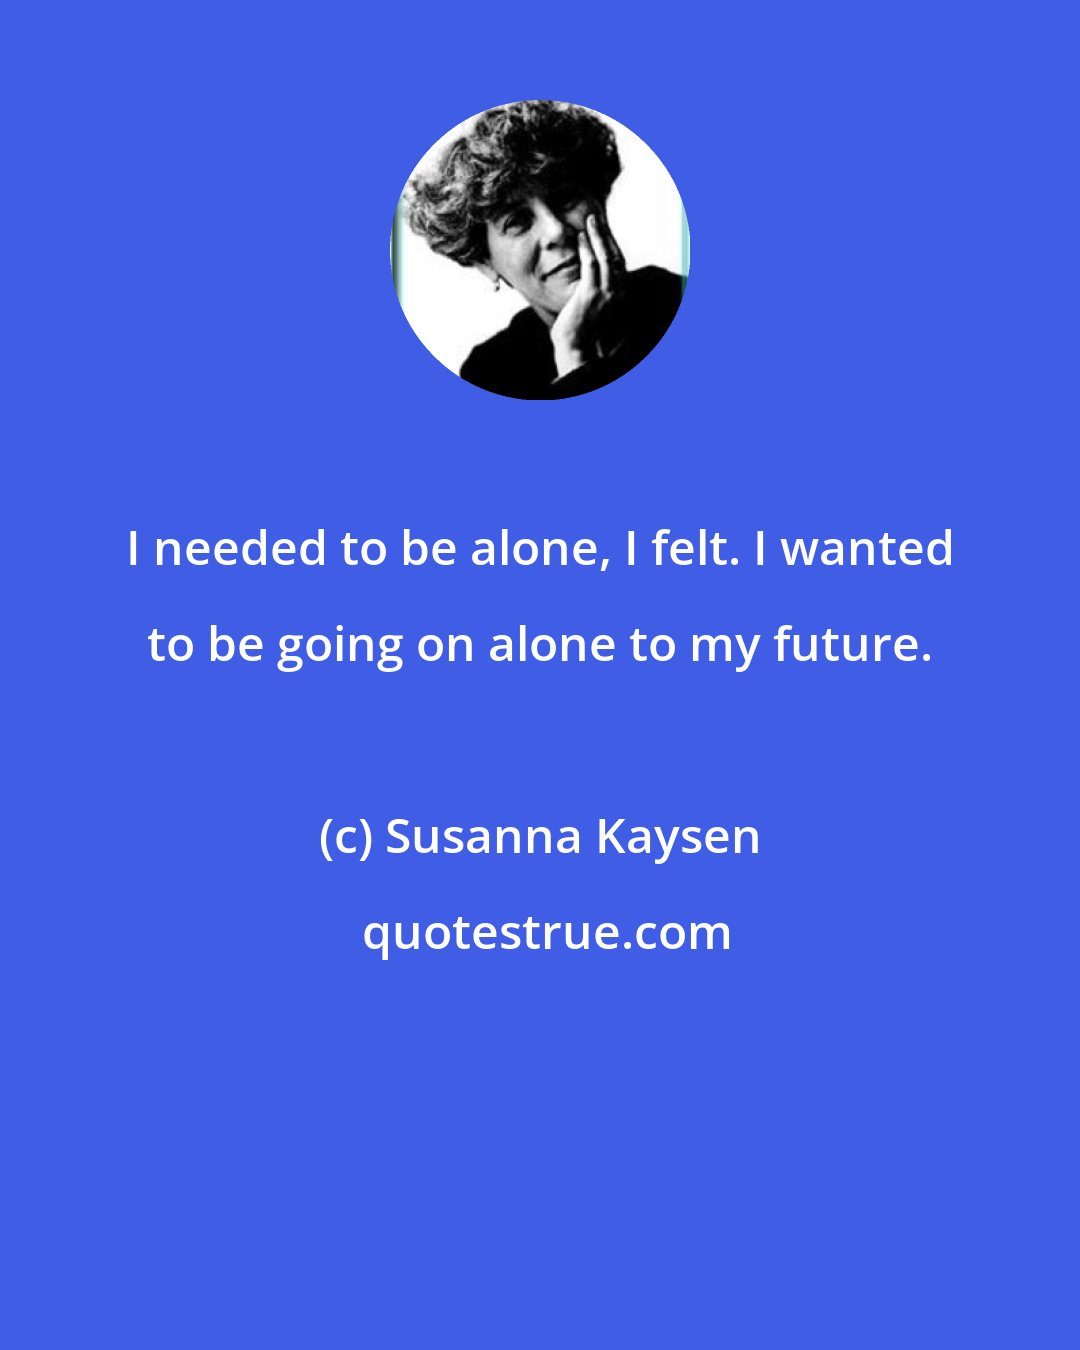 Susanna Kaysen: I needed to be alone, I felt. I wanted to be going on alone to my future.